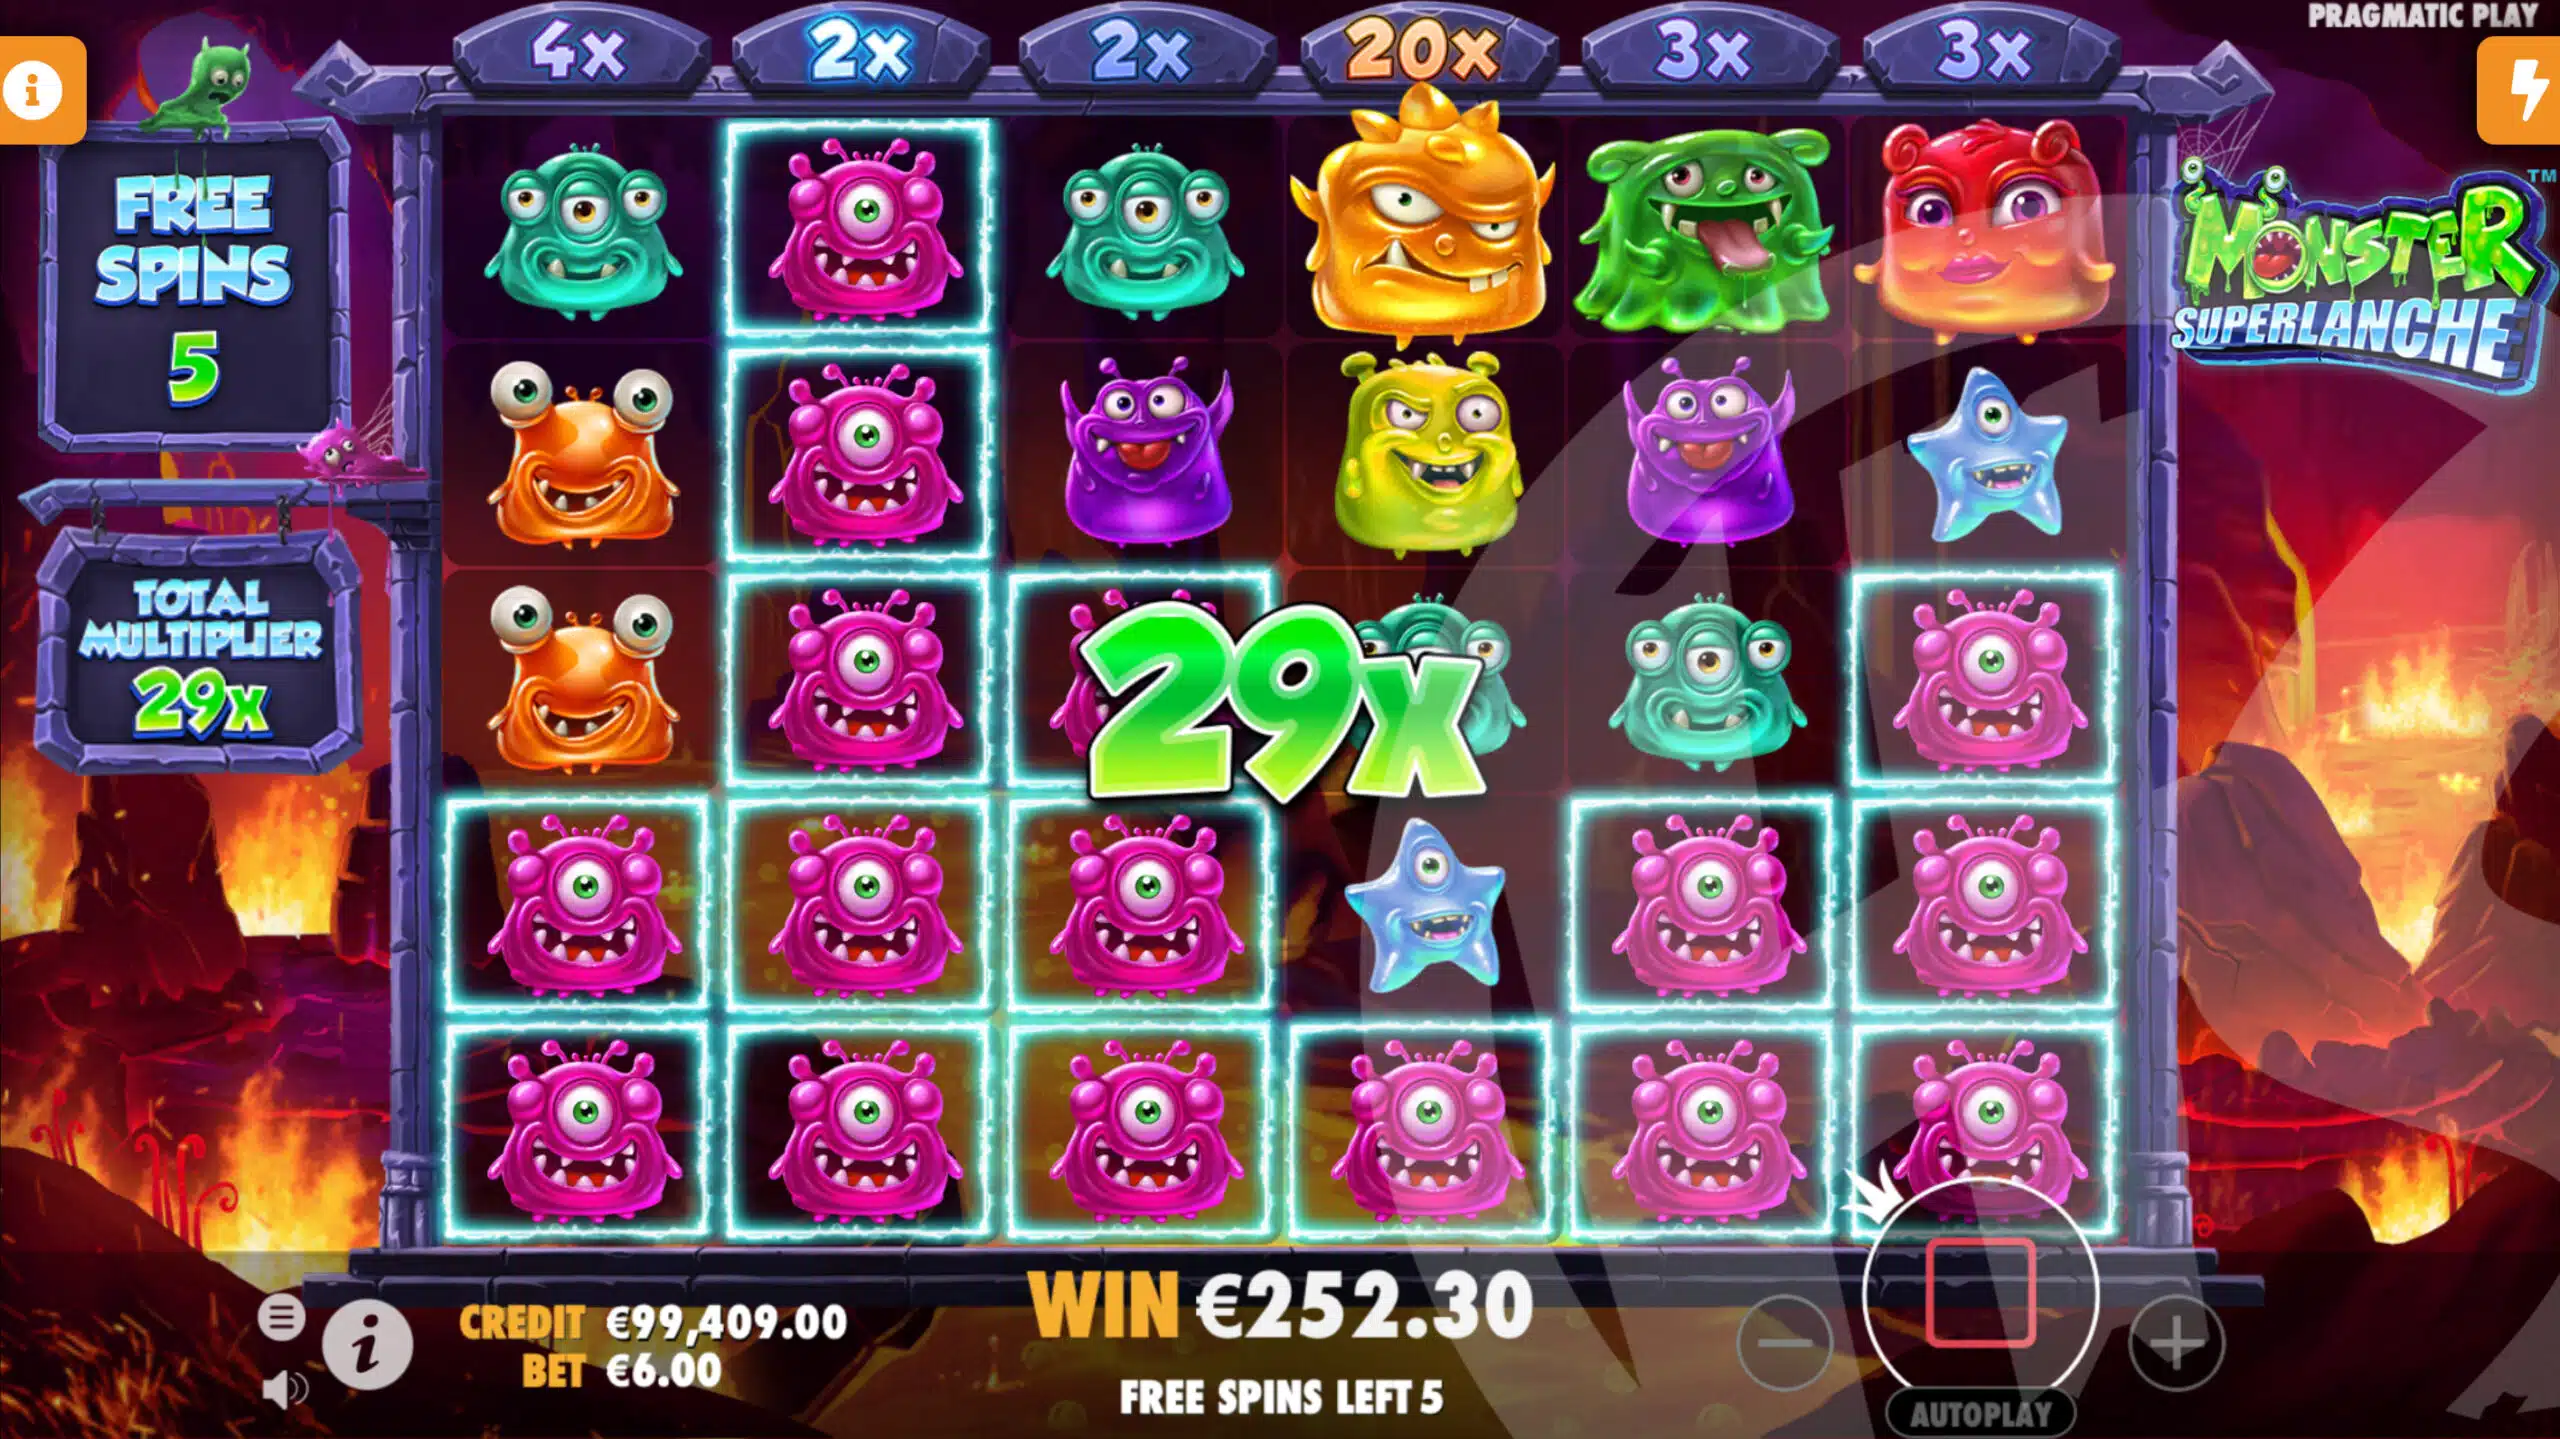 Fill a Reel With Winning Symbols During Free Spins to Add Its' Multiplier to the Total Multiplier